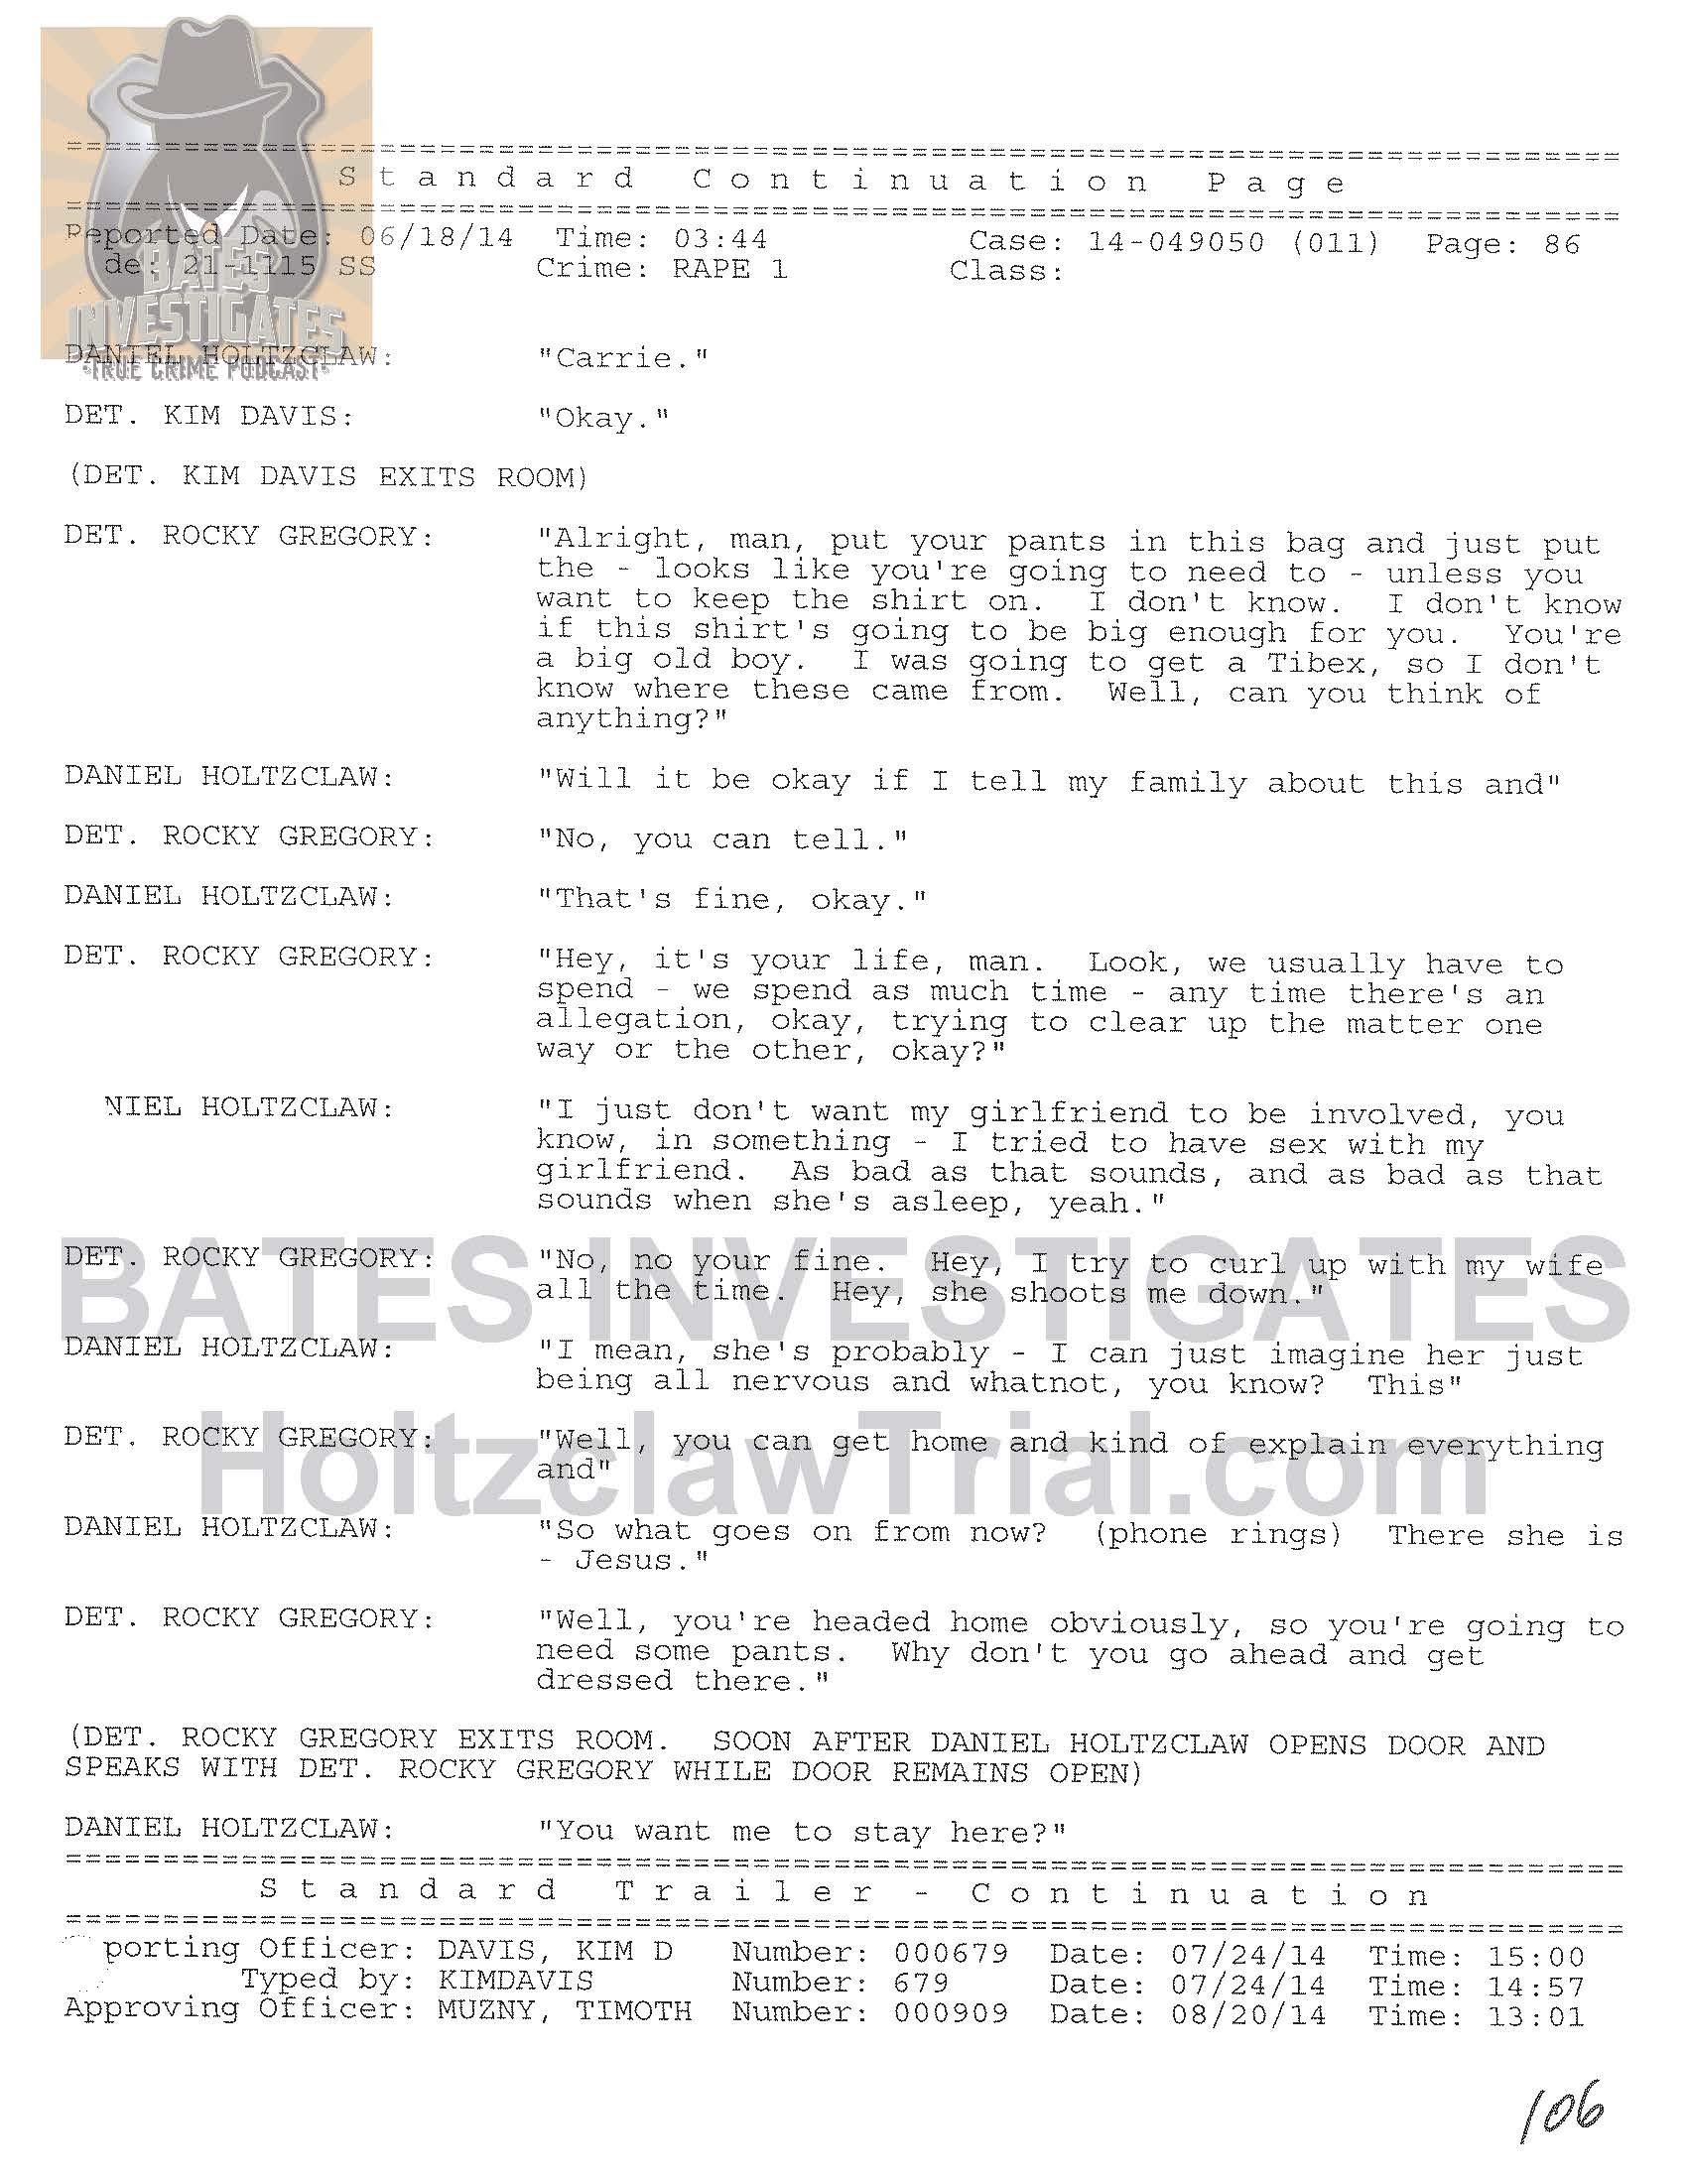 Holtzclaw Interrogation Transcript - Ep02 Redacted_Page_86.jpg